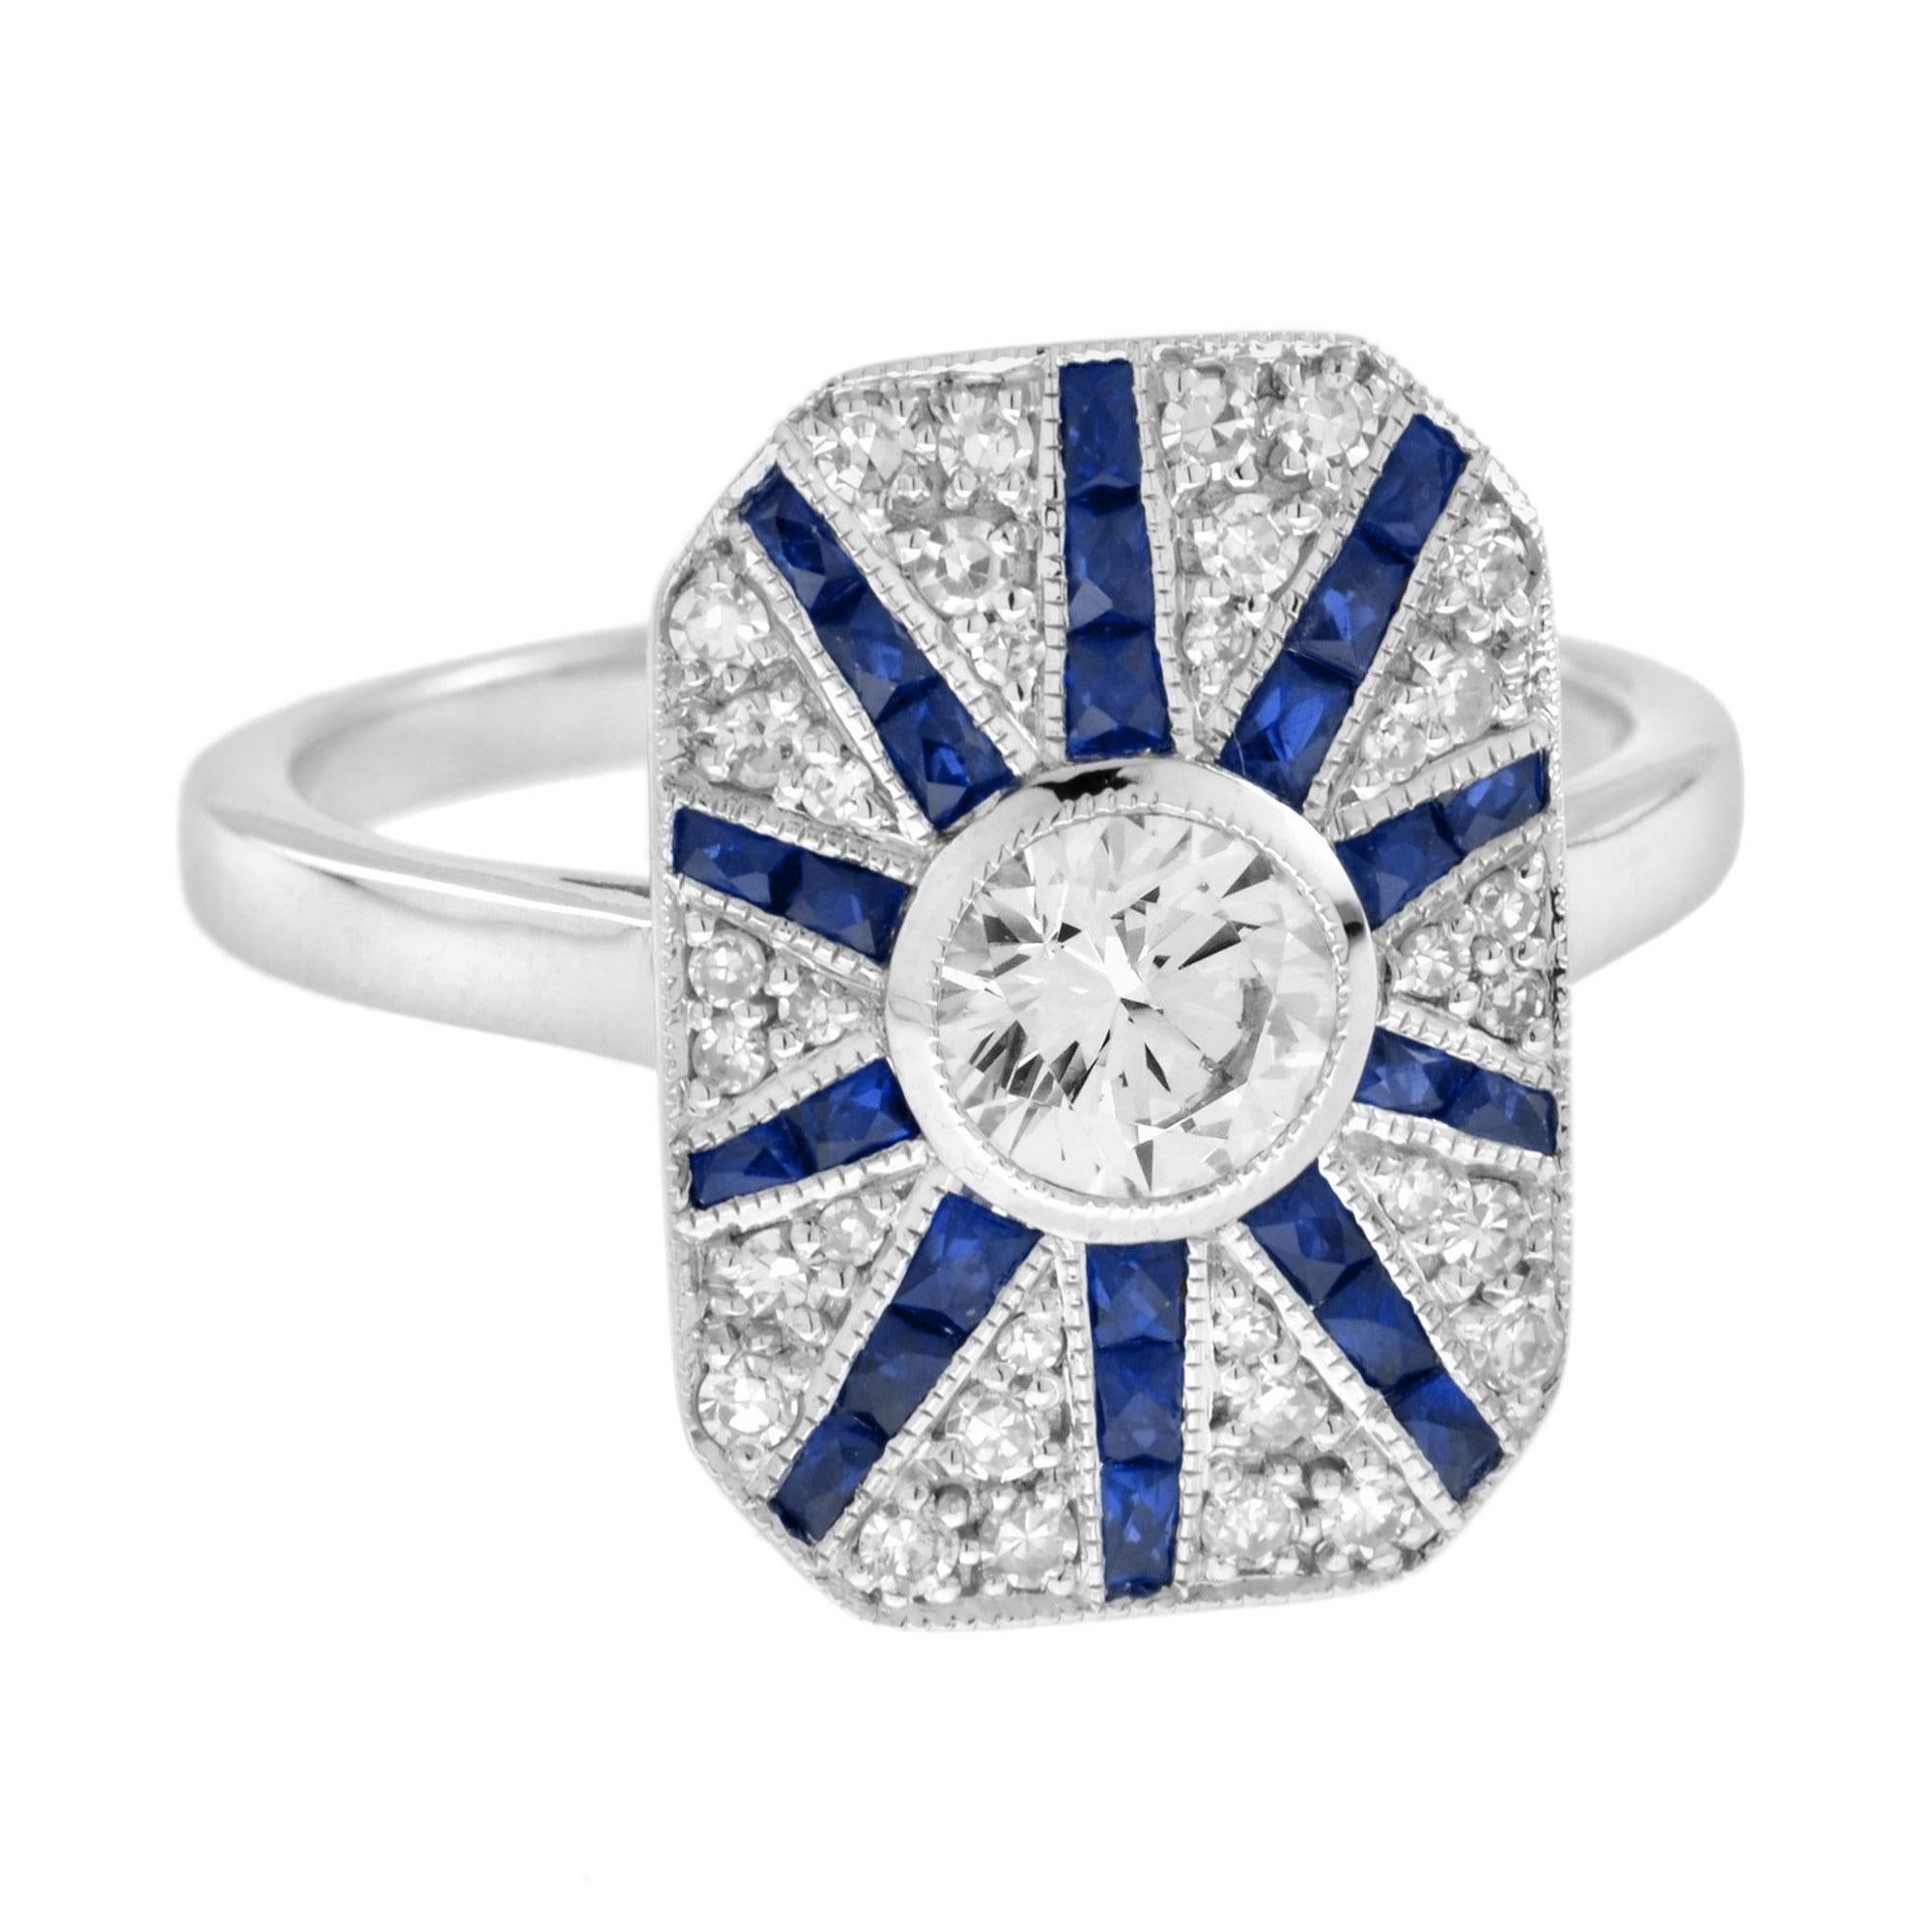 Round Cut Diamond and Blue Sapphire Art Deco Style Halo Ring in 18K White Gold For Sale